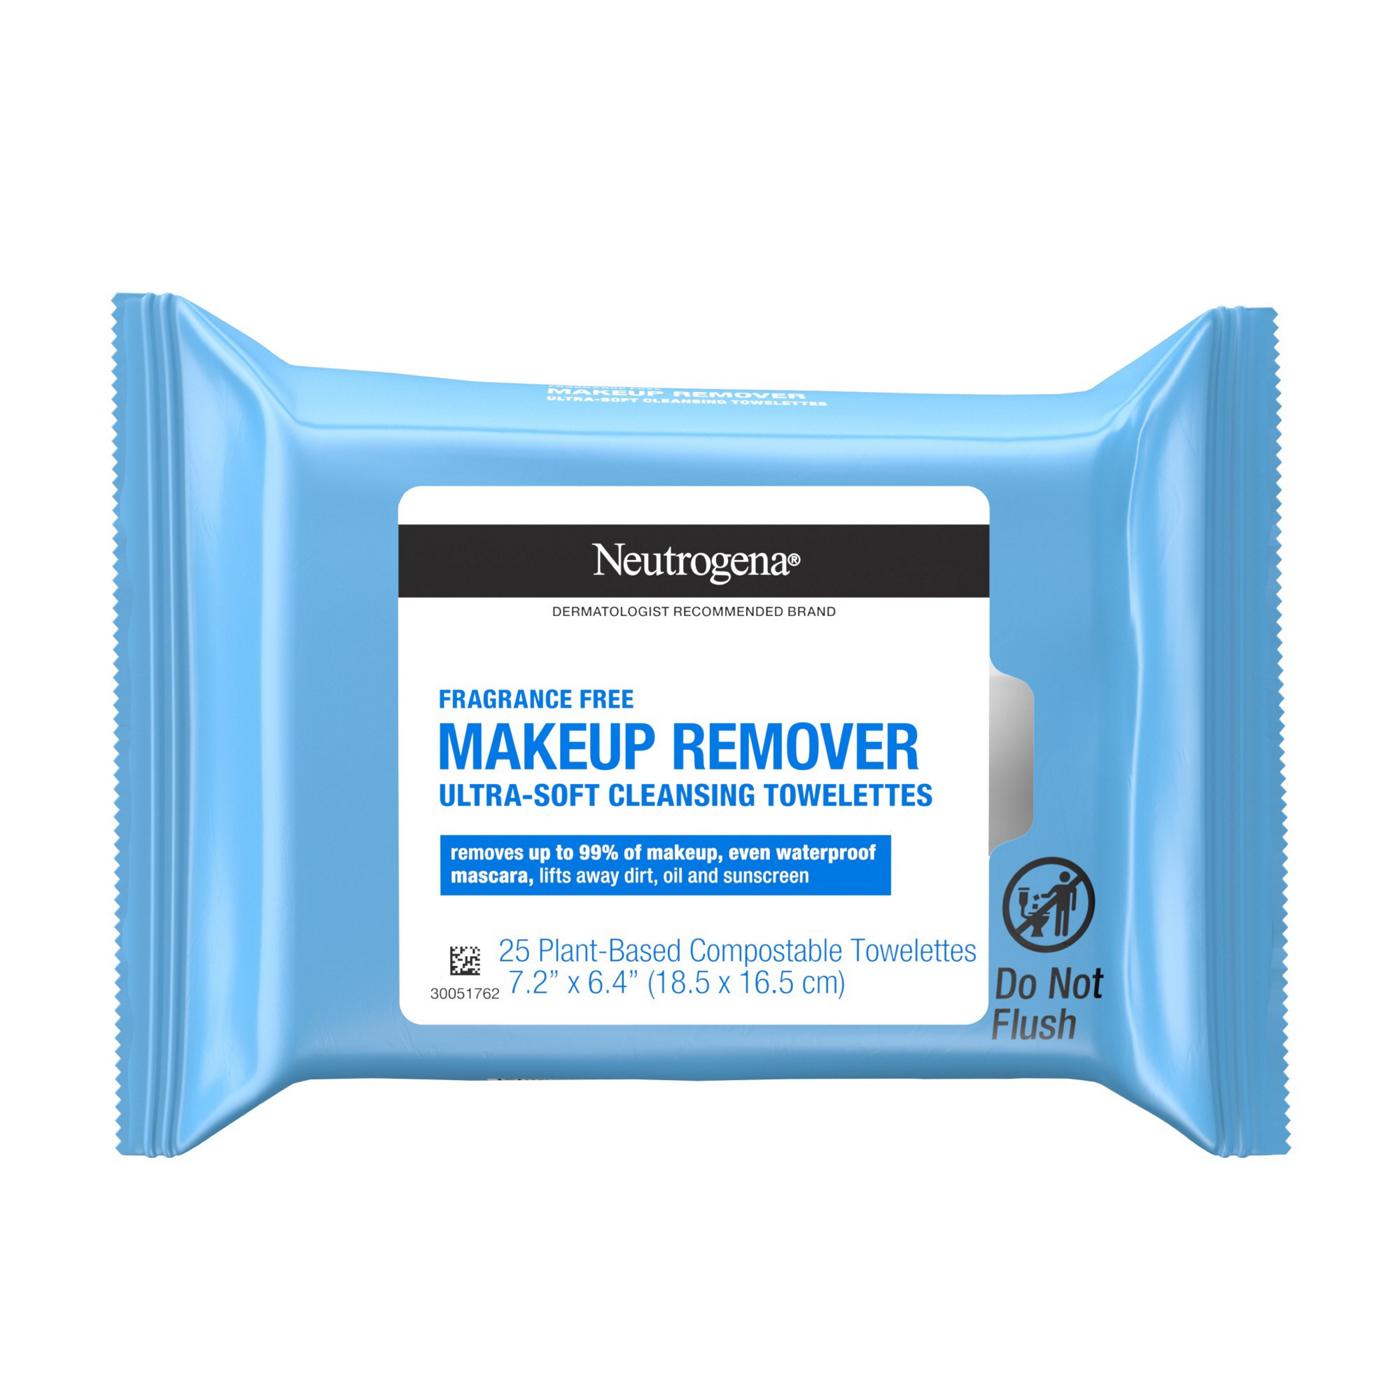 Neutrogena Makeup Remover Cleansing Towelettes - Fragrance Free; image 1 of 8